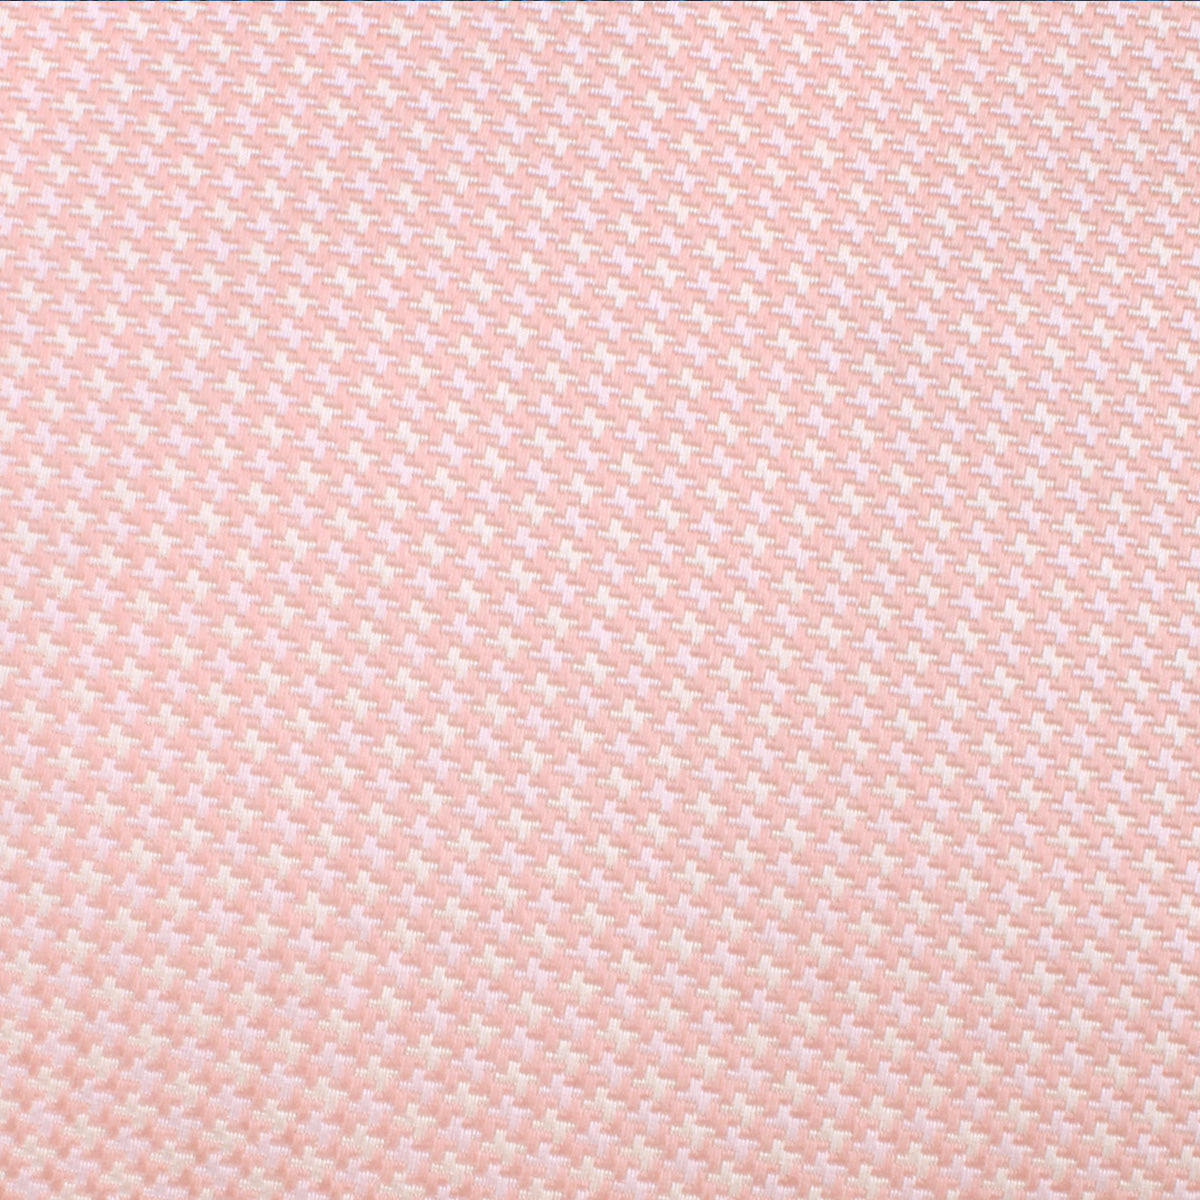 Blush Pink Houndstooth Bow Tie Fabric